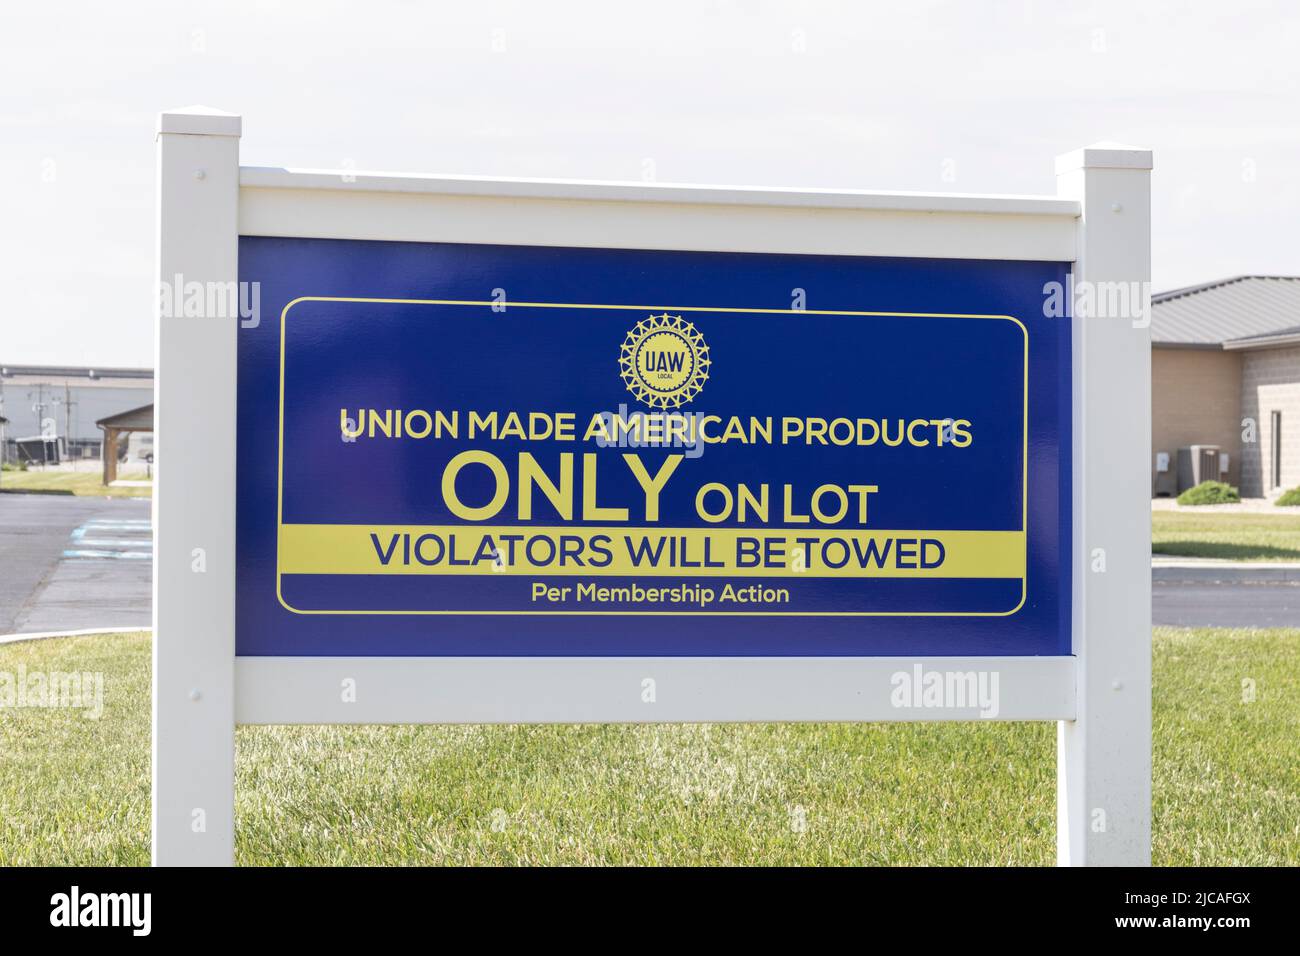 Kokomo - Circa June 2022: UNION MADE AMERICAN PRODUCTS ONLY ON LOT sign at a UAW local. The United Auto Workers is a labor union that represents Auto Stock Photo